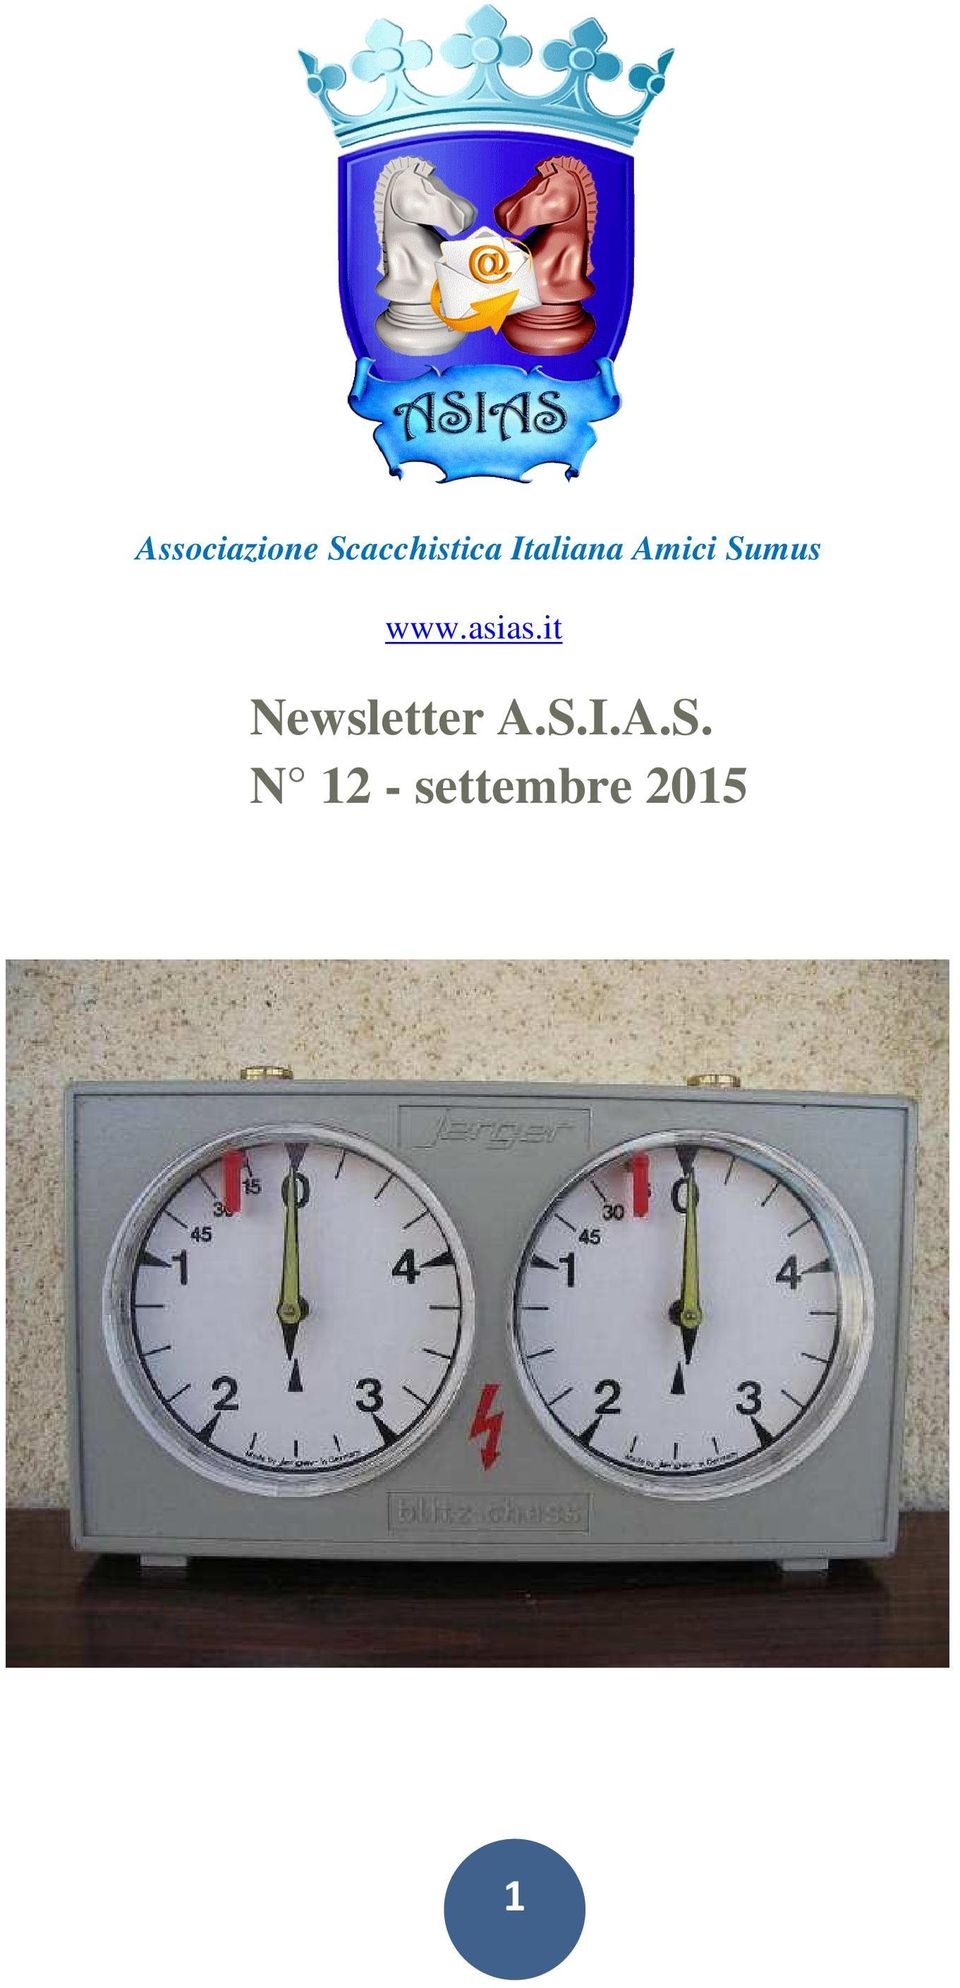 asias.it Newsletter A.S.I.